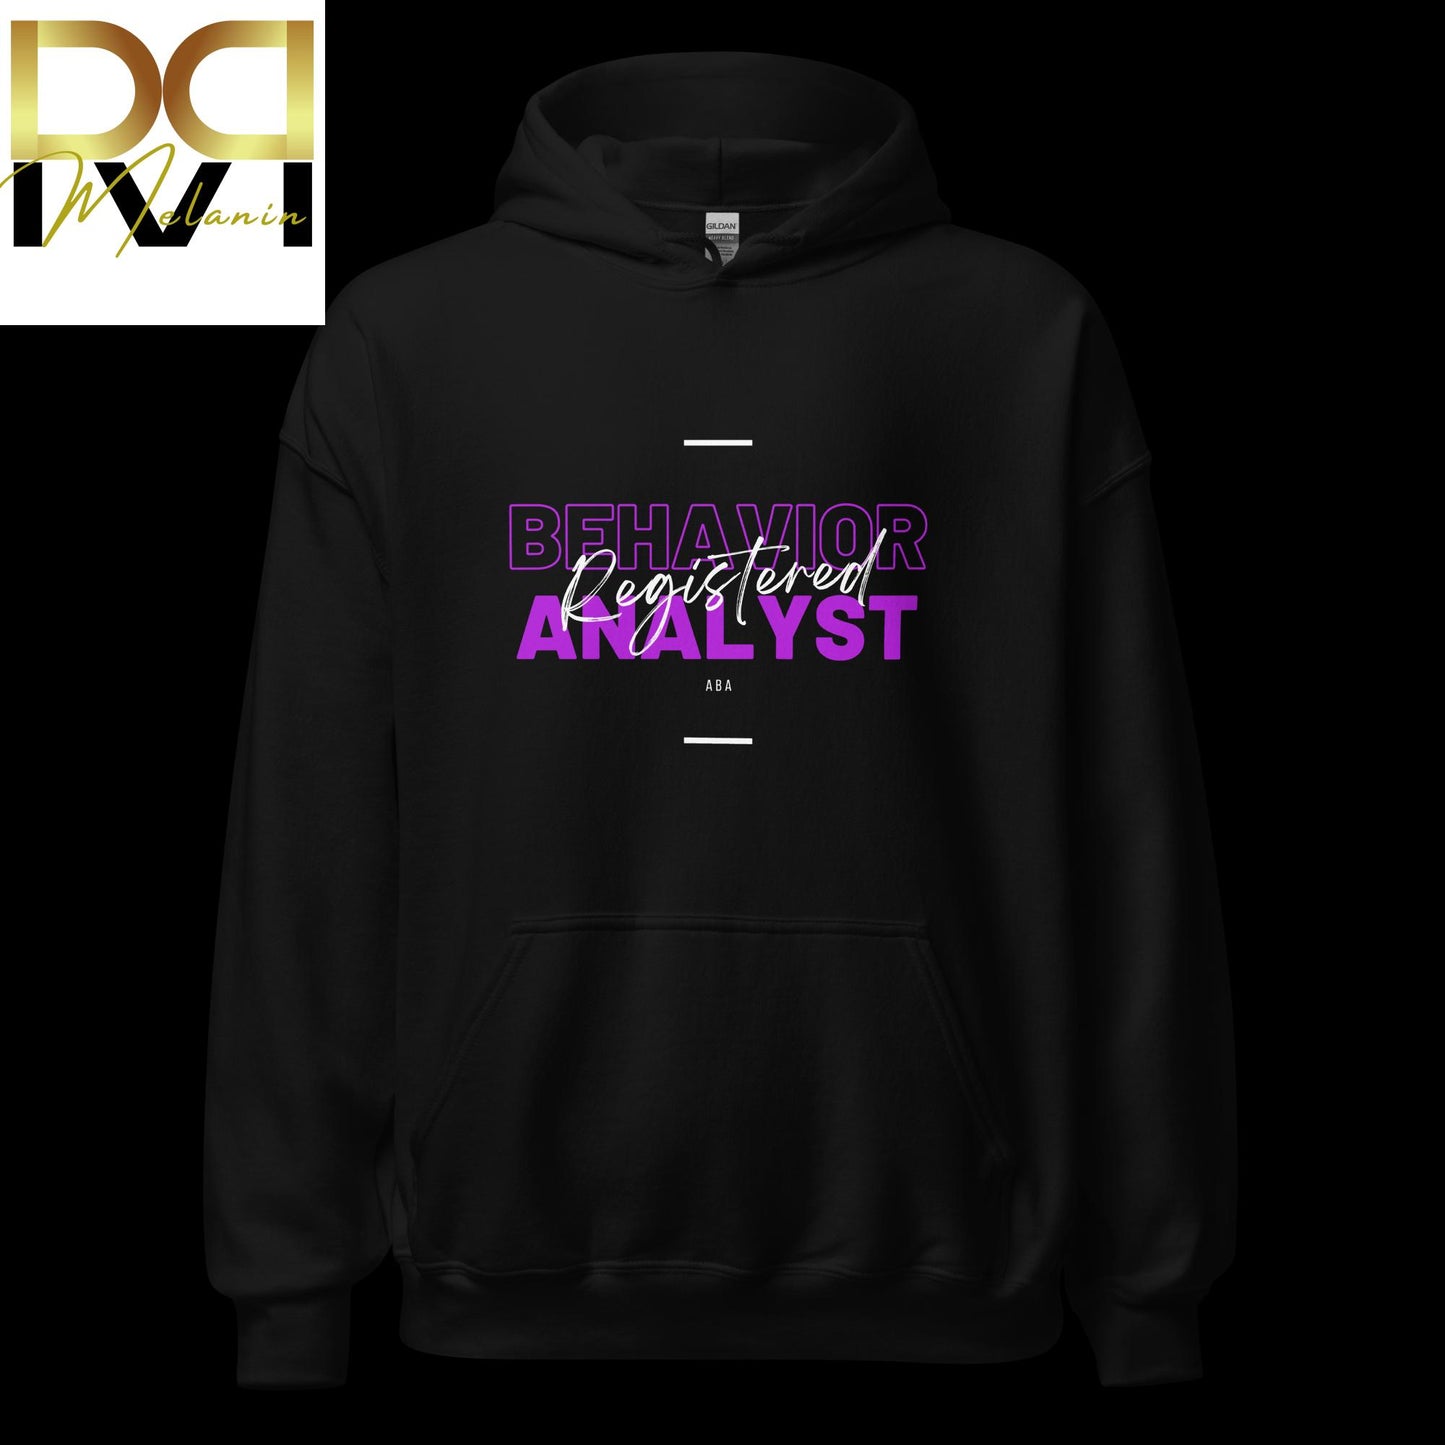 Registered Behavior Analyst" Hoodie - Cozy, Professional, and Stylish